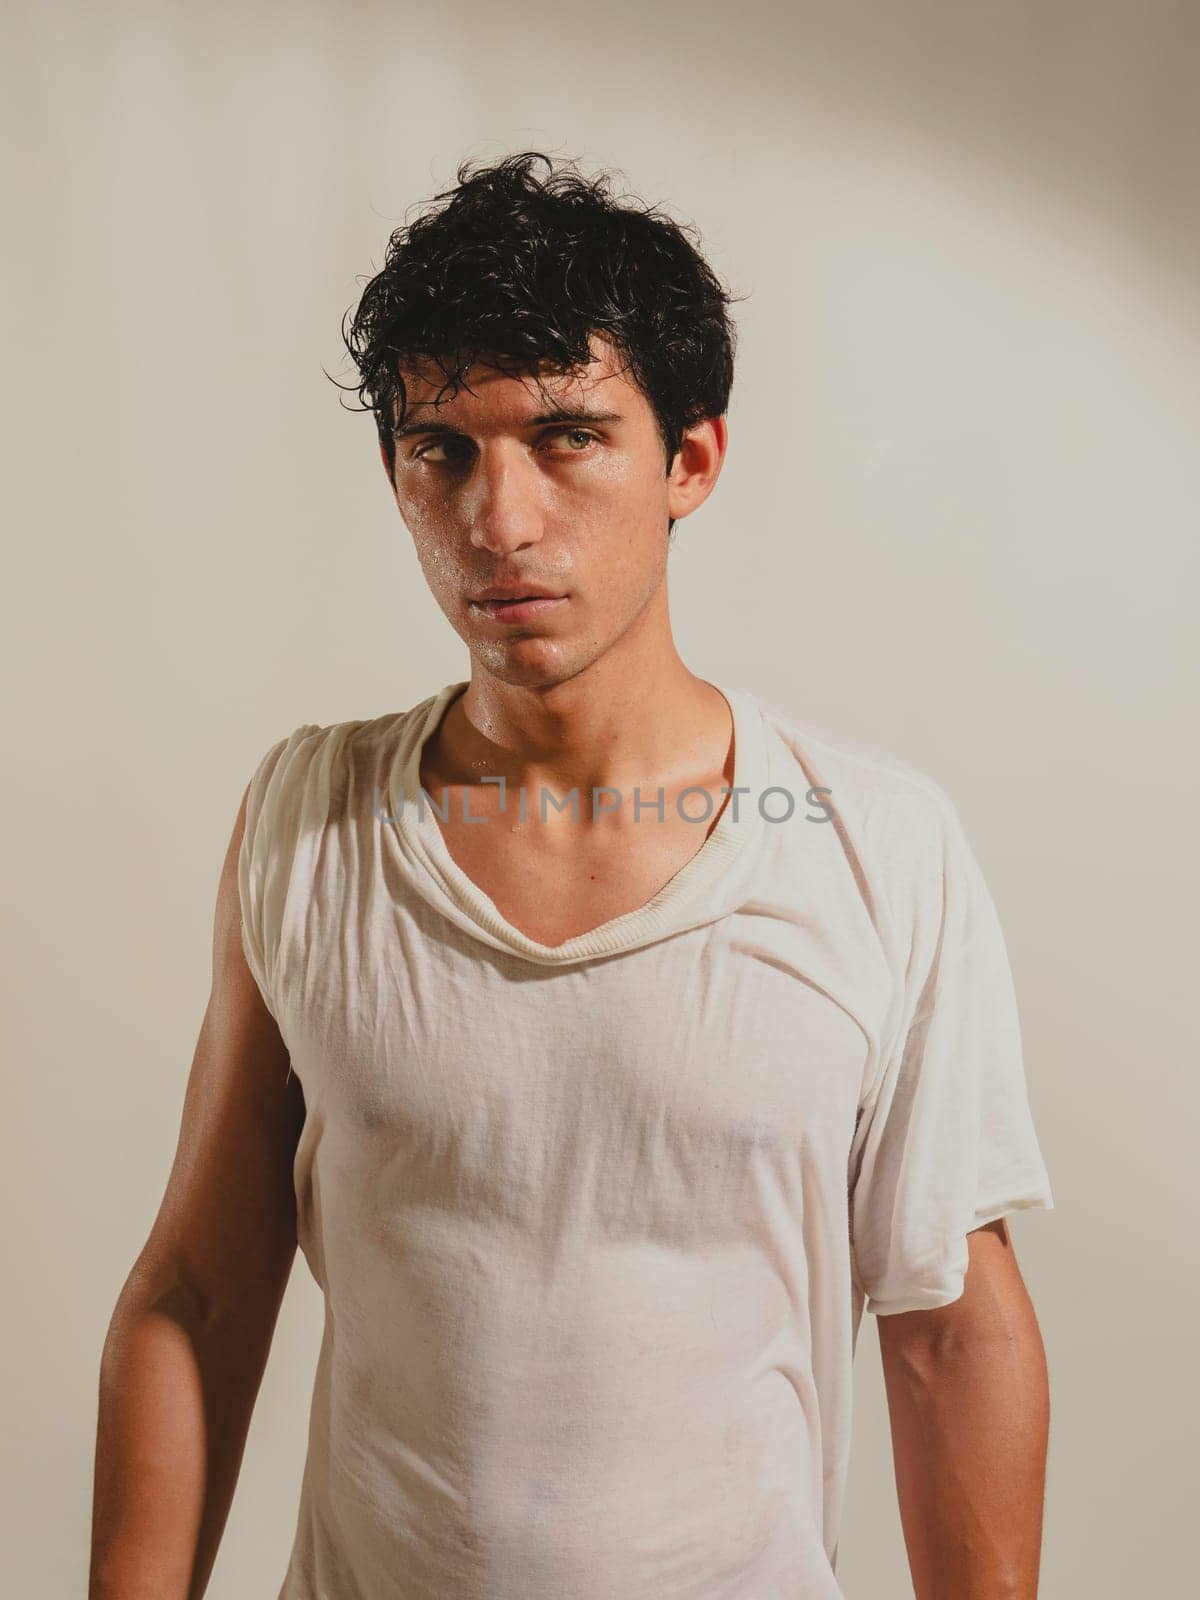 Serious looking young man wearing wet t-shirt, looking at camera on light background. by artofphoto